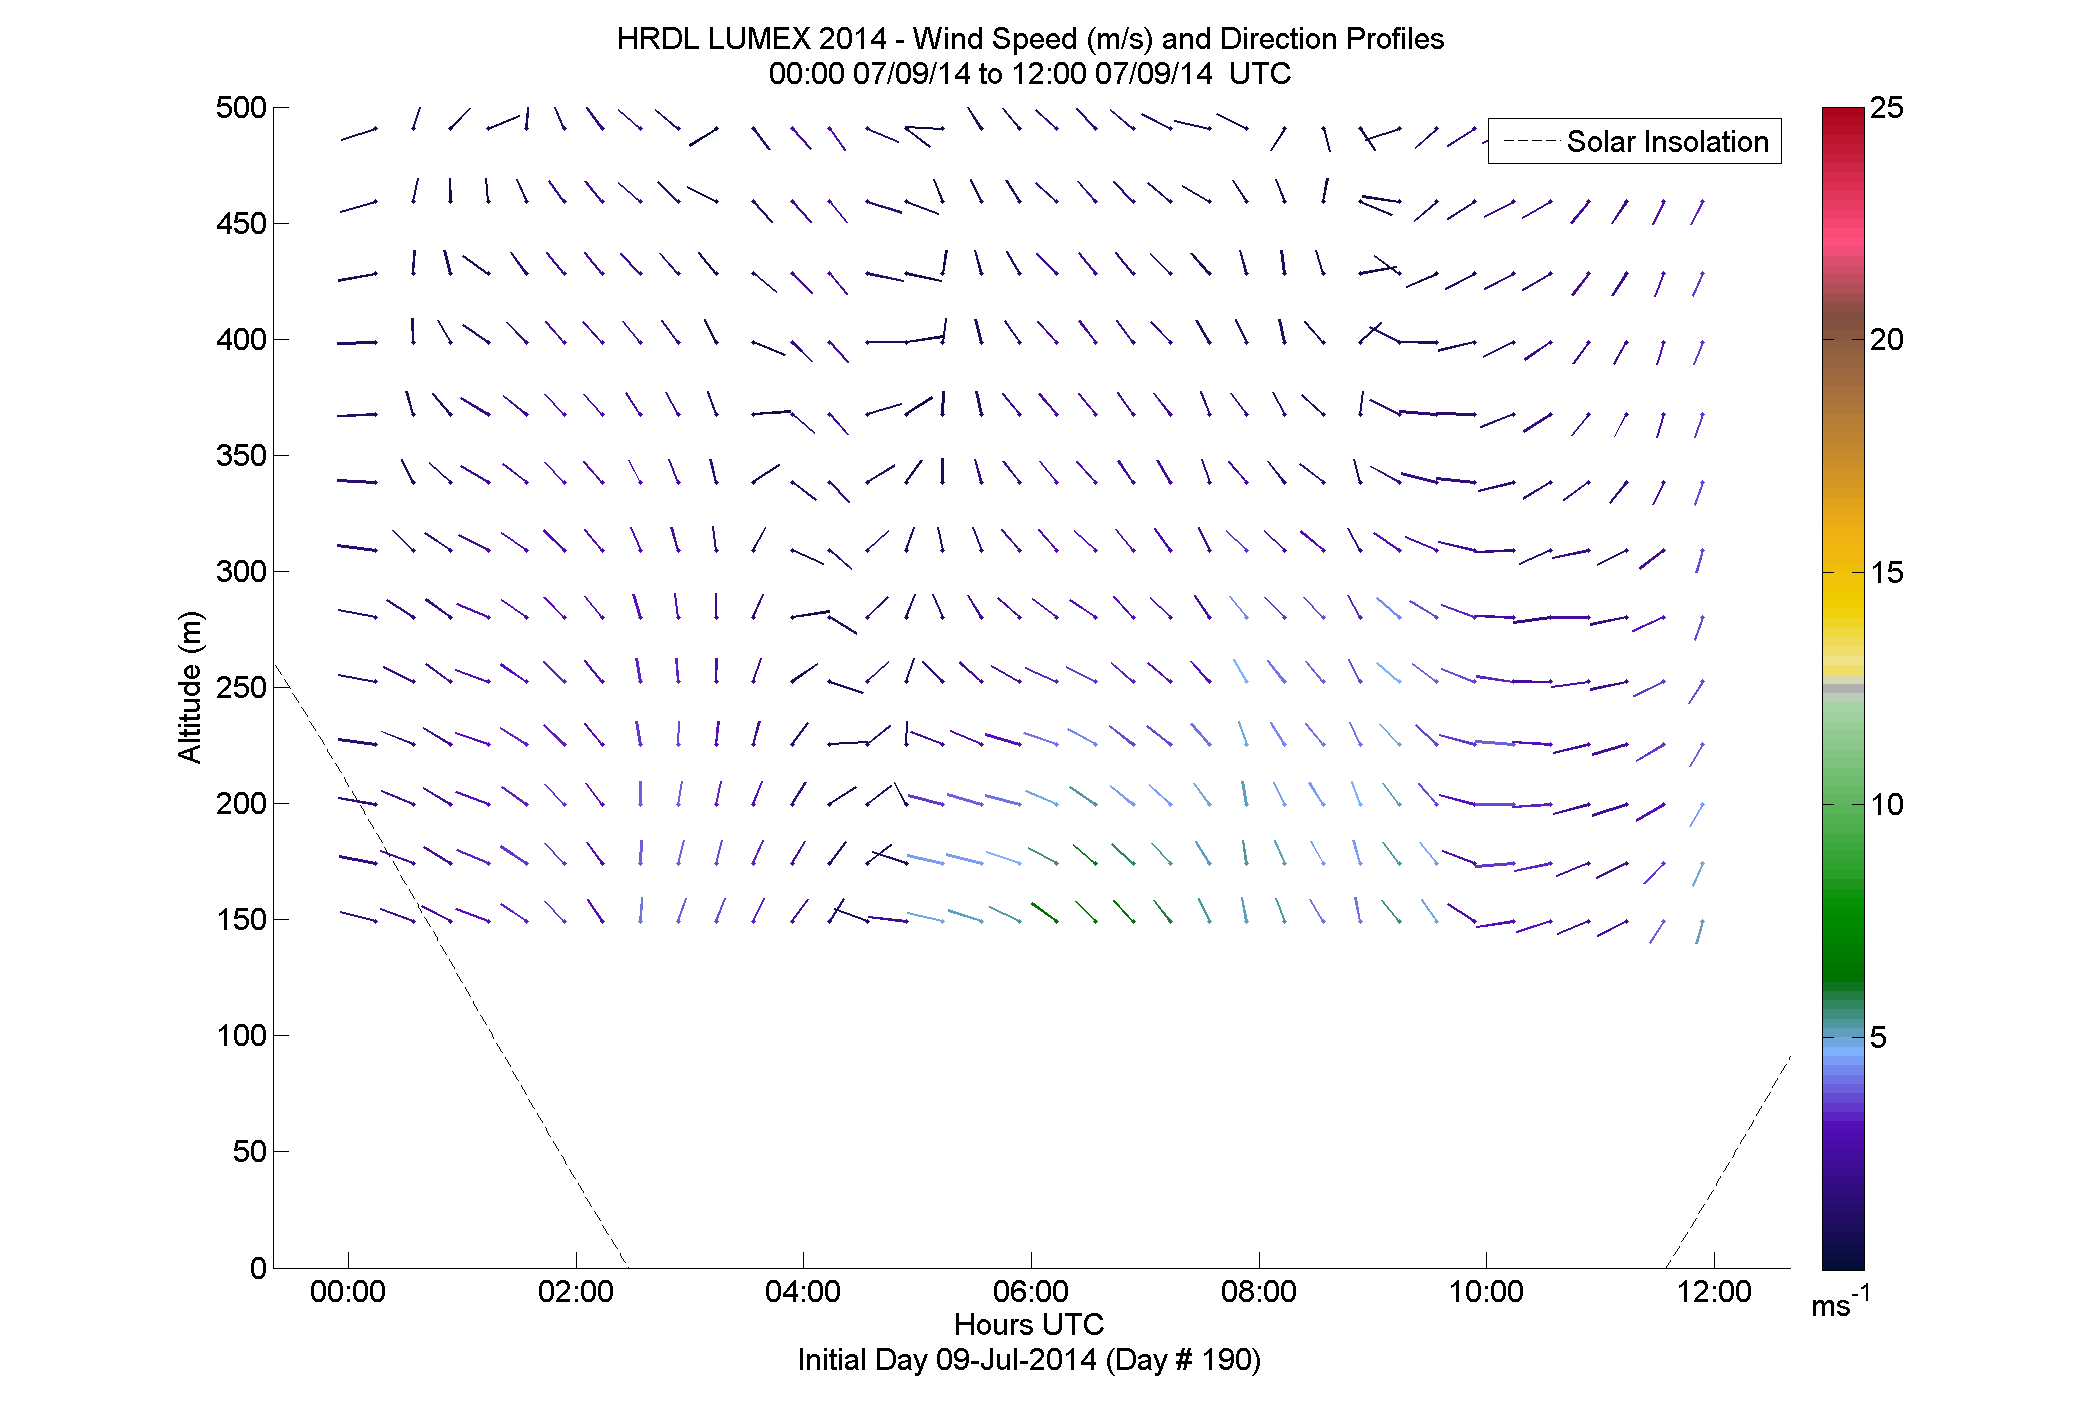 HRDL speed and direction profile - July 9 am